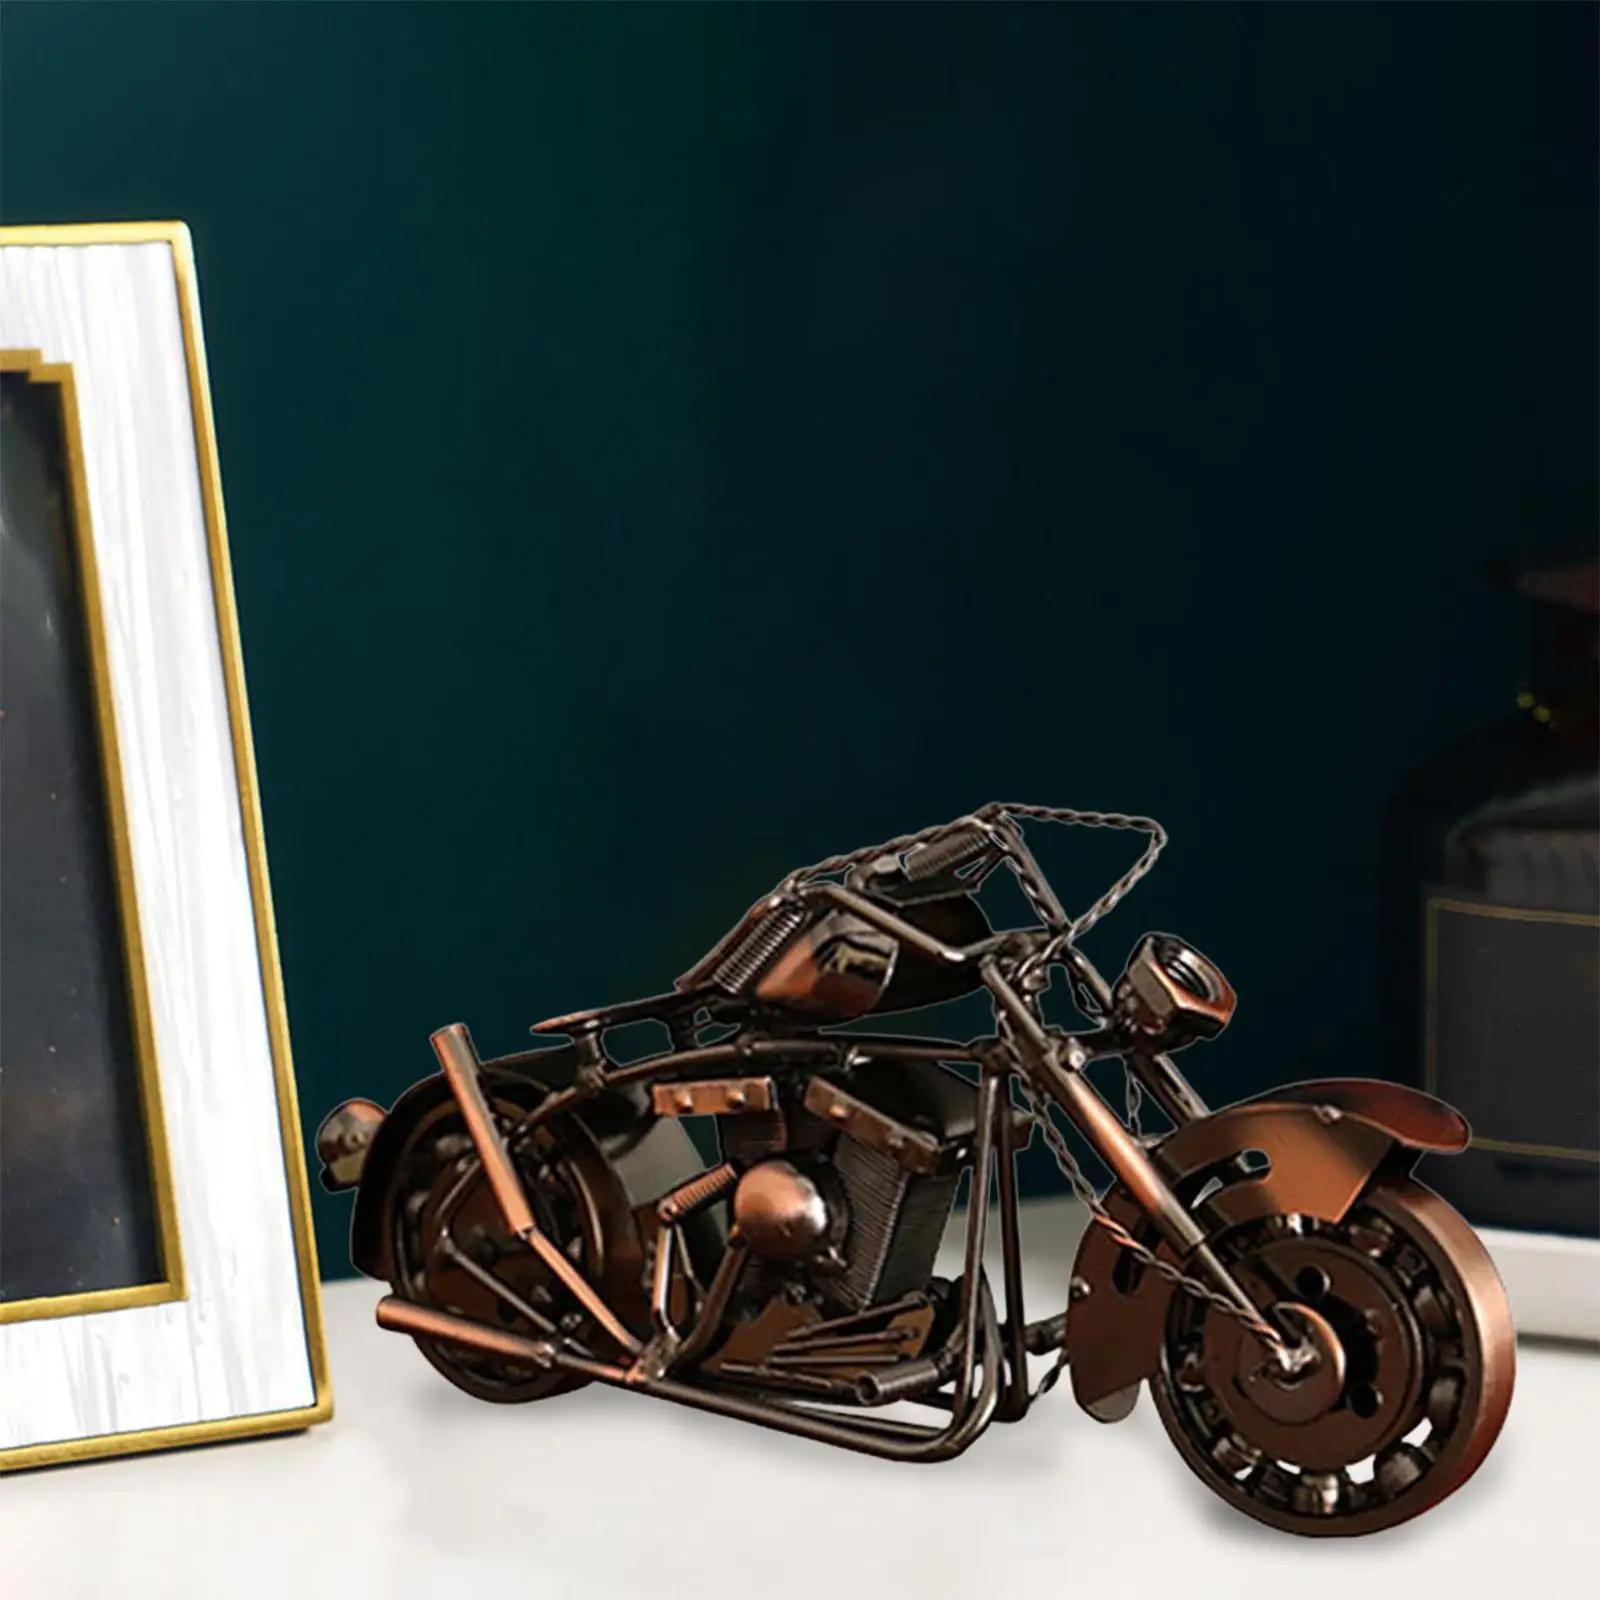 Motorcycle Model Motorbike Iron Art Sculpture Collection Classical